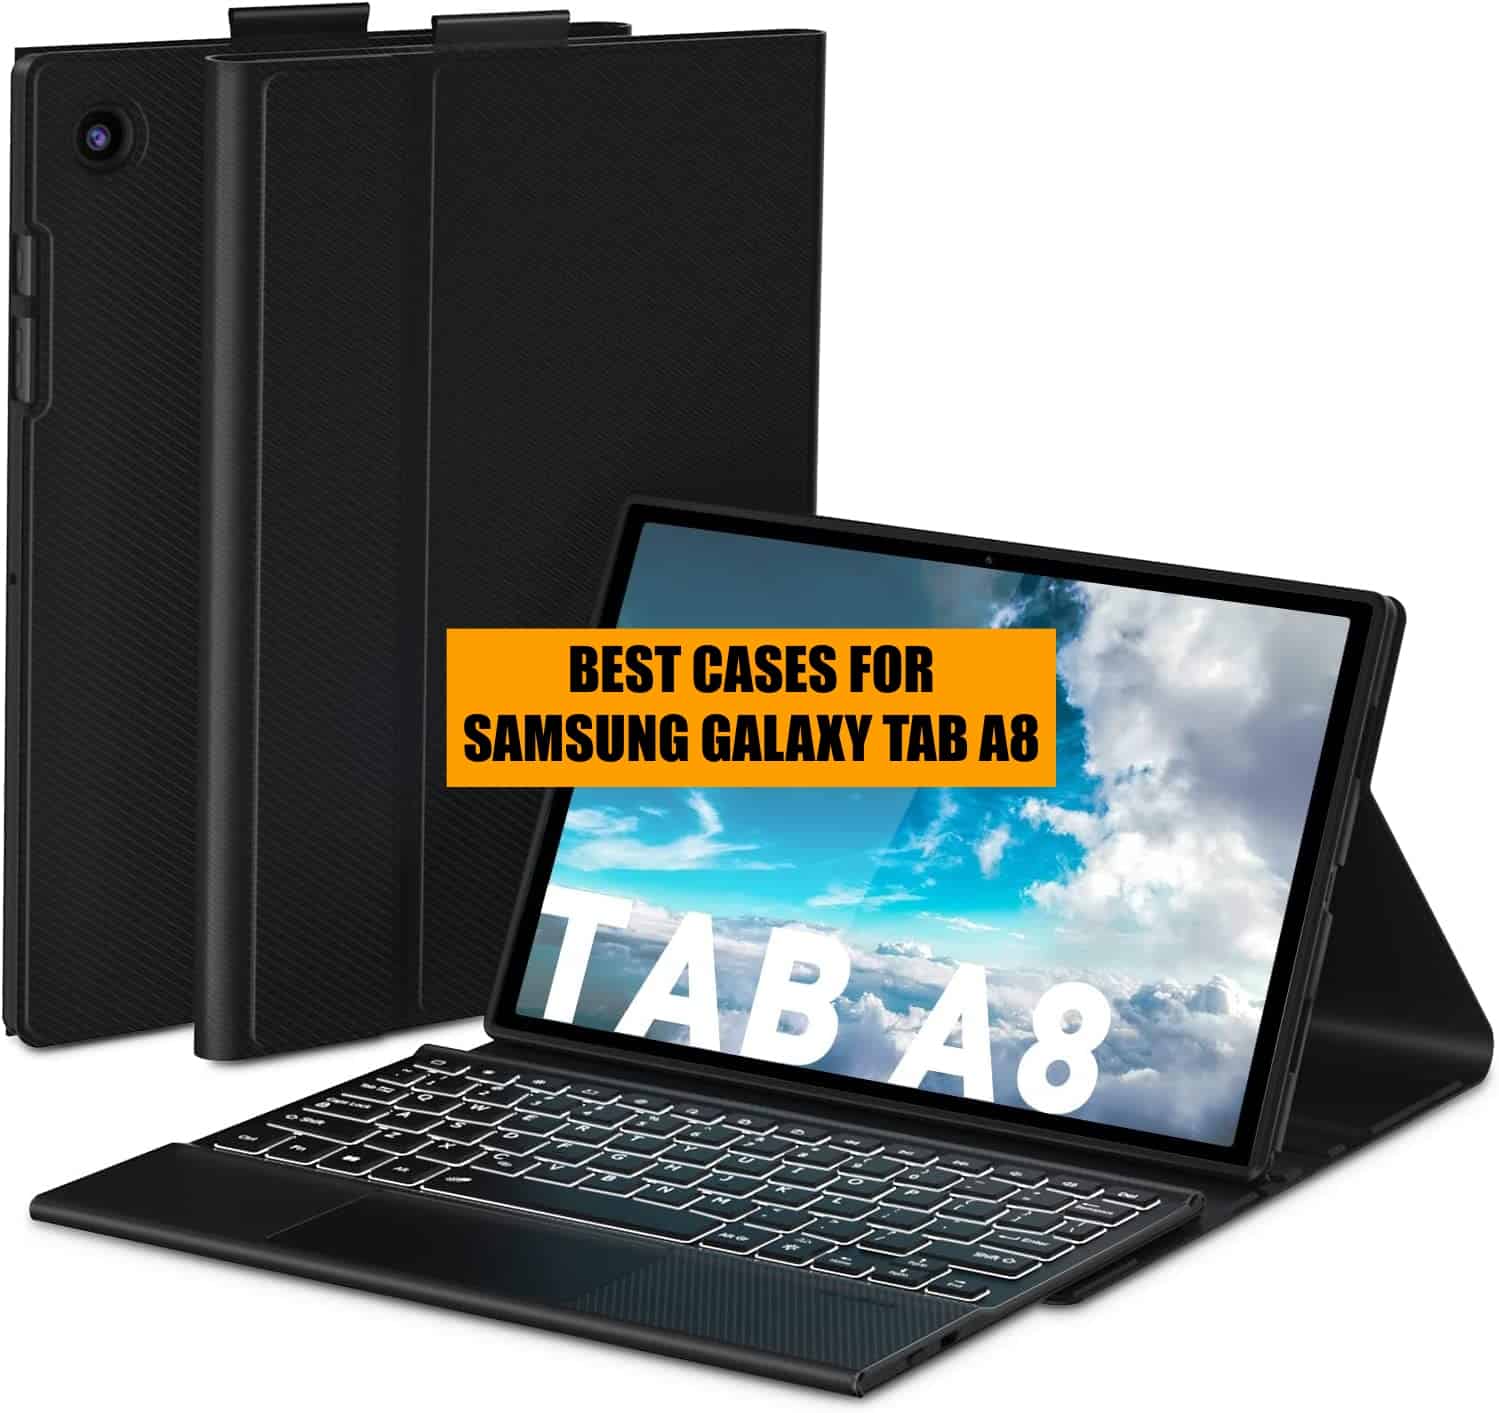 Best cases and covers for samsung galaxy tab a8